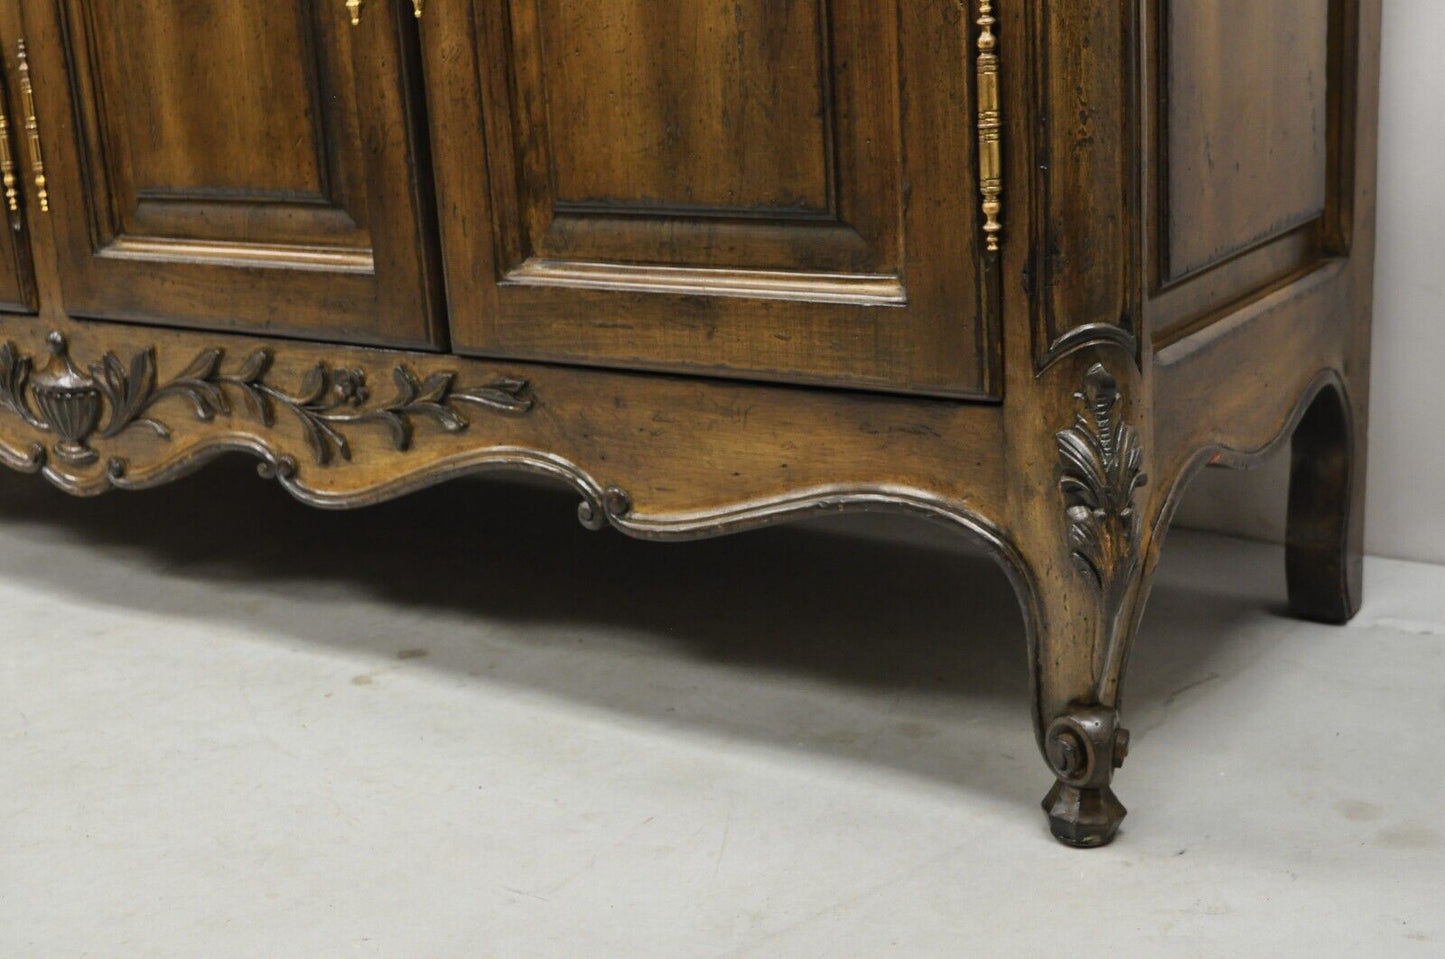 Vintage French Country Provincial Style Carved Walnut 4 Door Sideboard Credenza